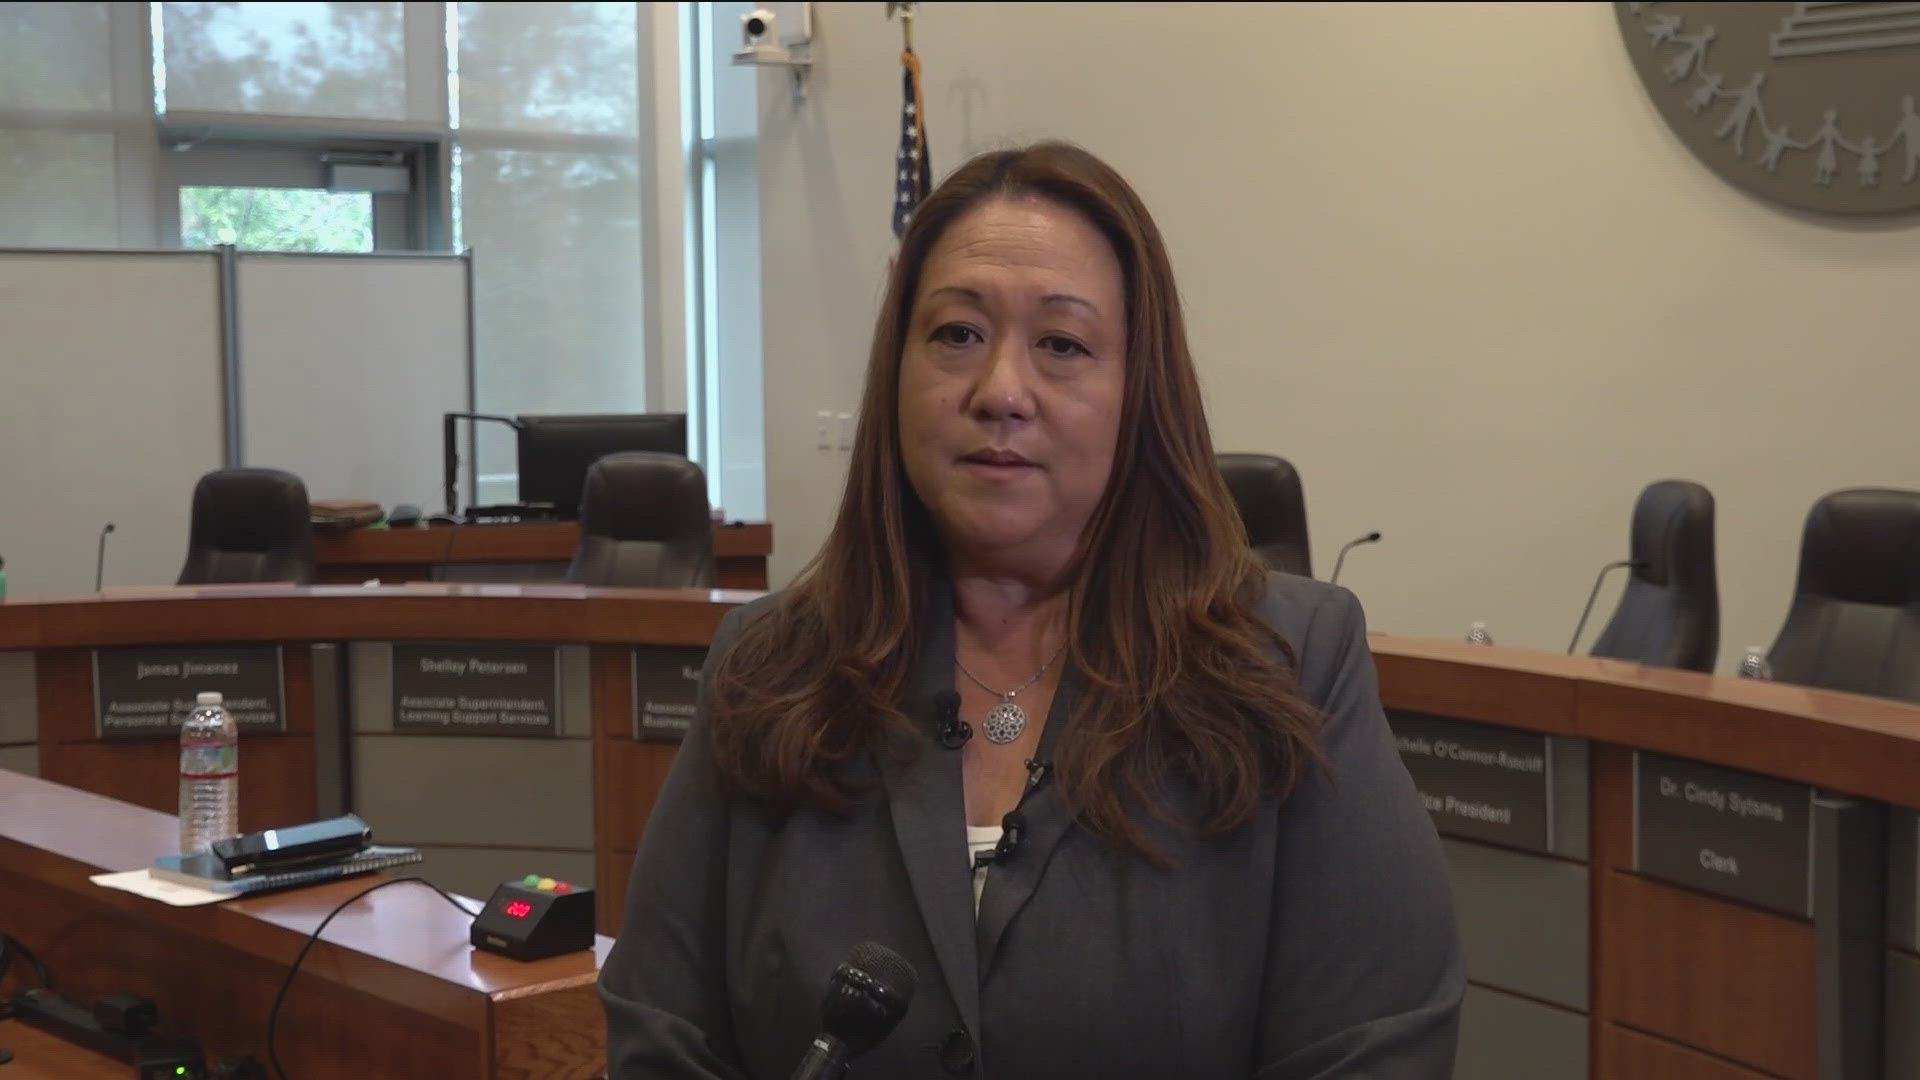 The board of Poway Unified School District voted Tuesday to fire Superintendent Marian Phelps, who has been on administrative leave since February.